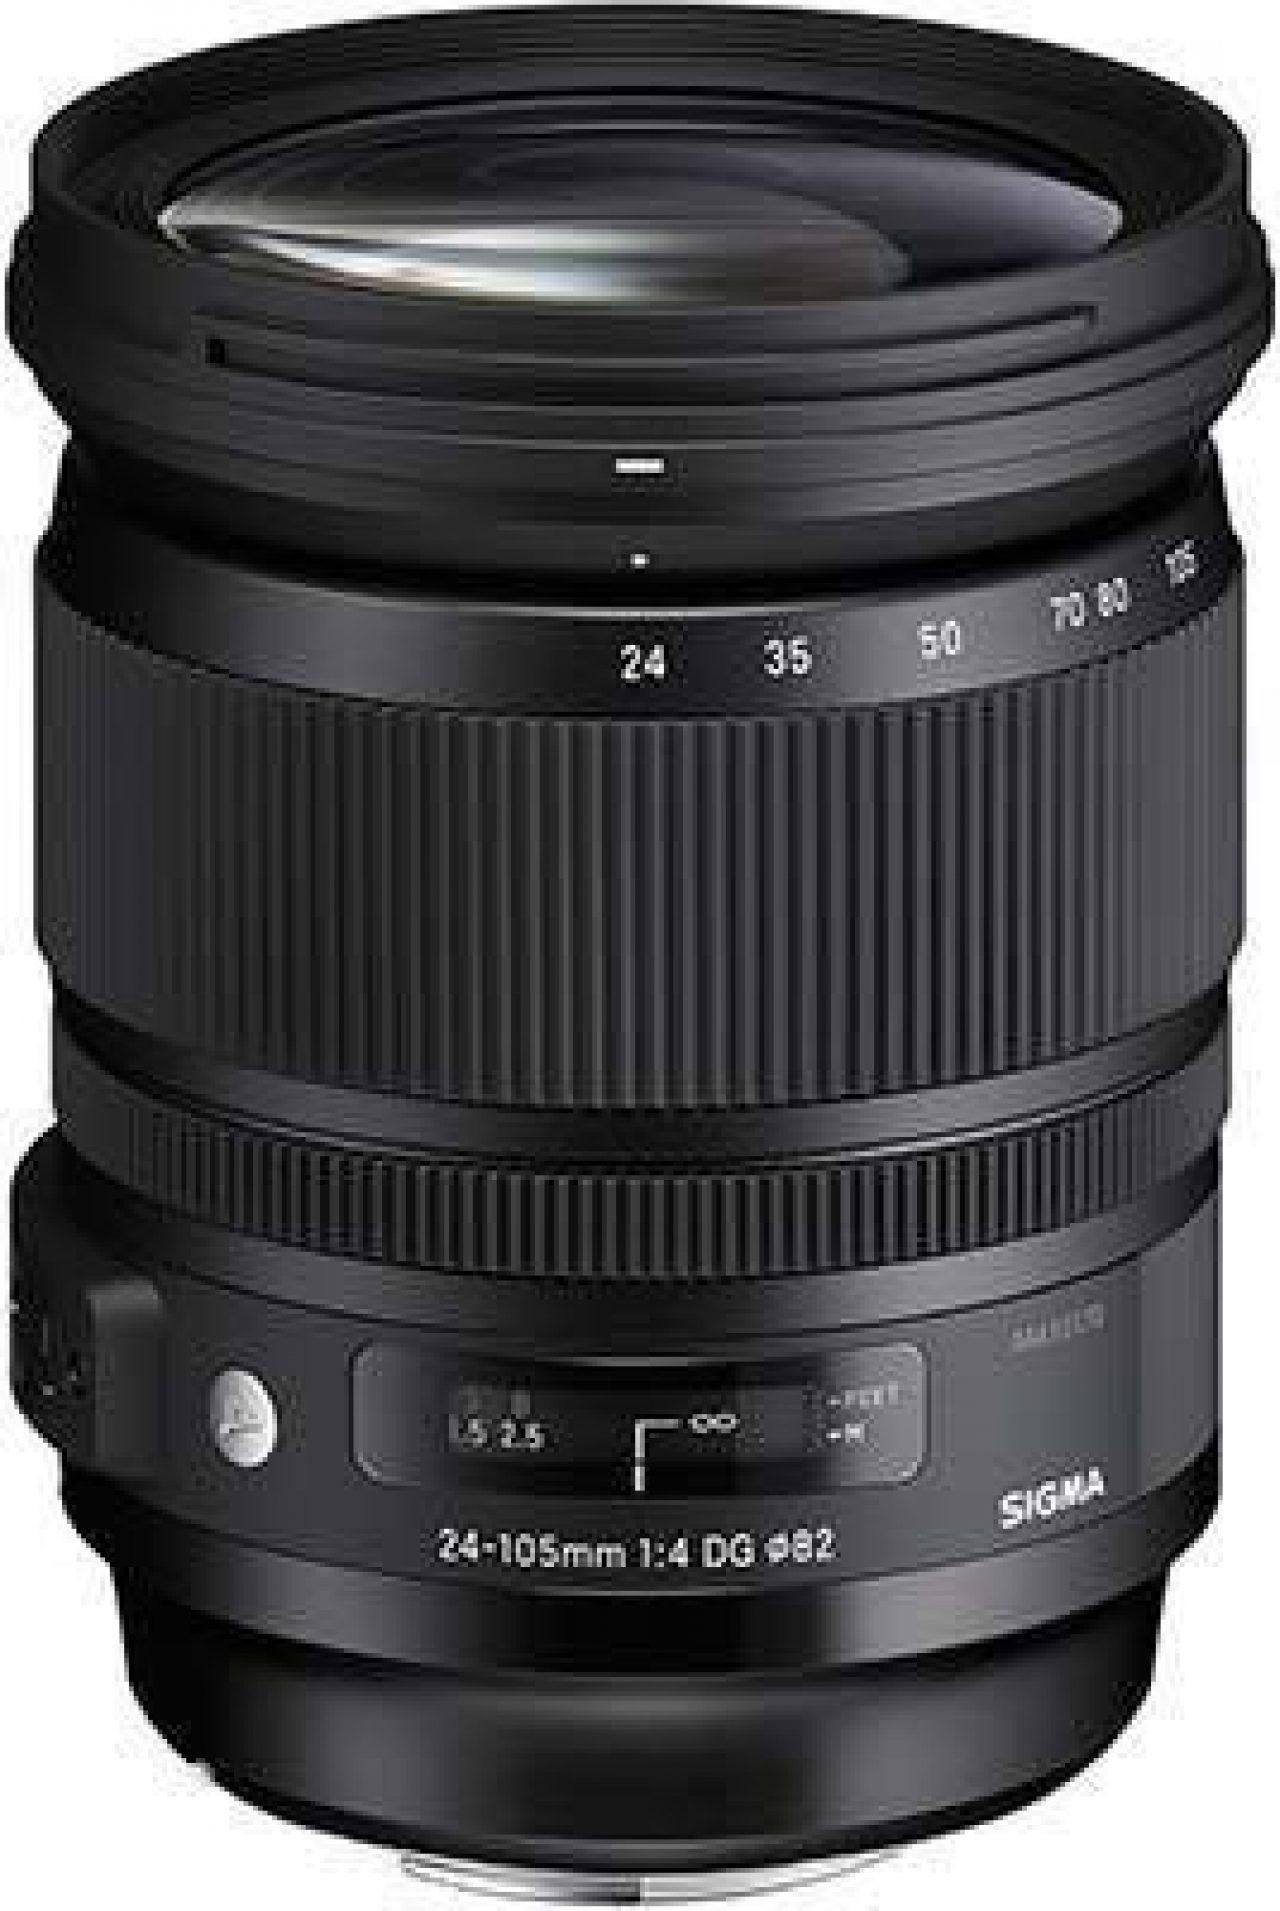 Scheur mosterd tieners Sigma 24-105mm F4 DG OS HSM Review | Photography Blog